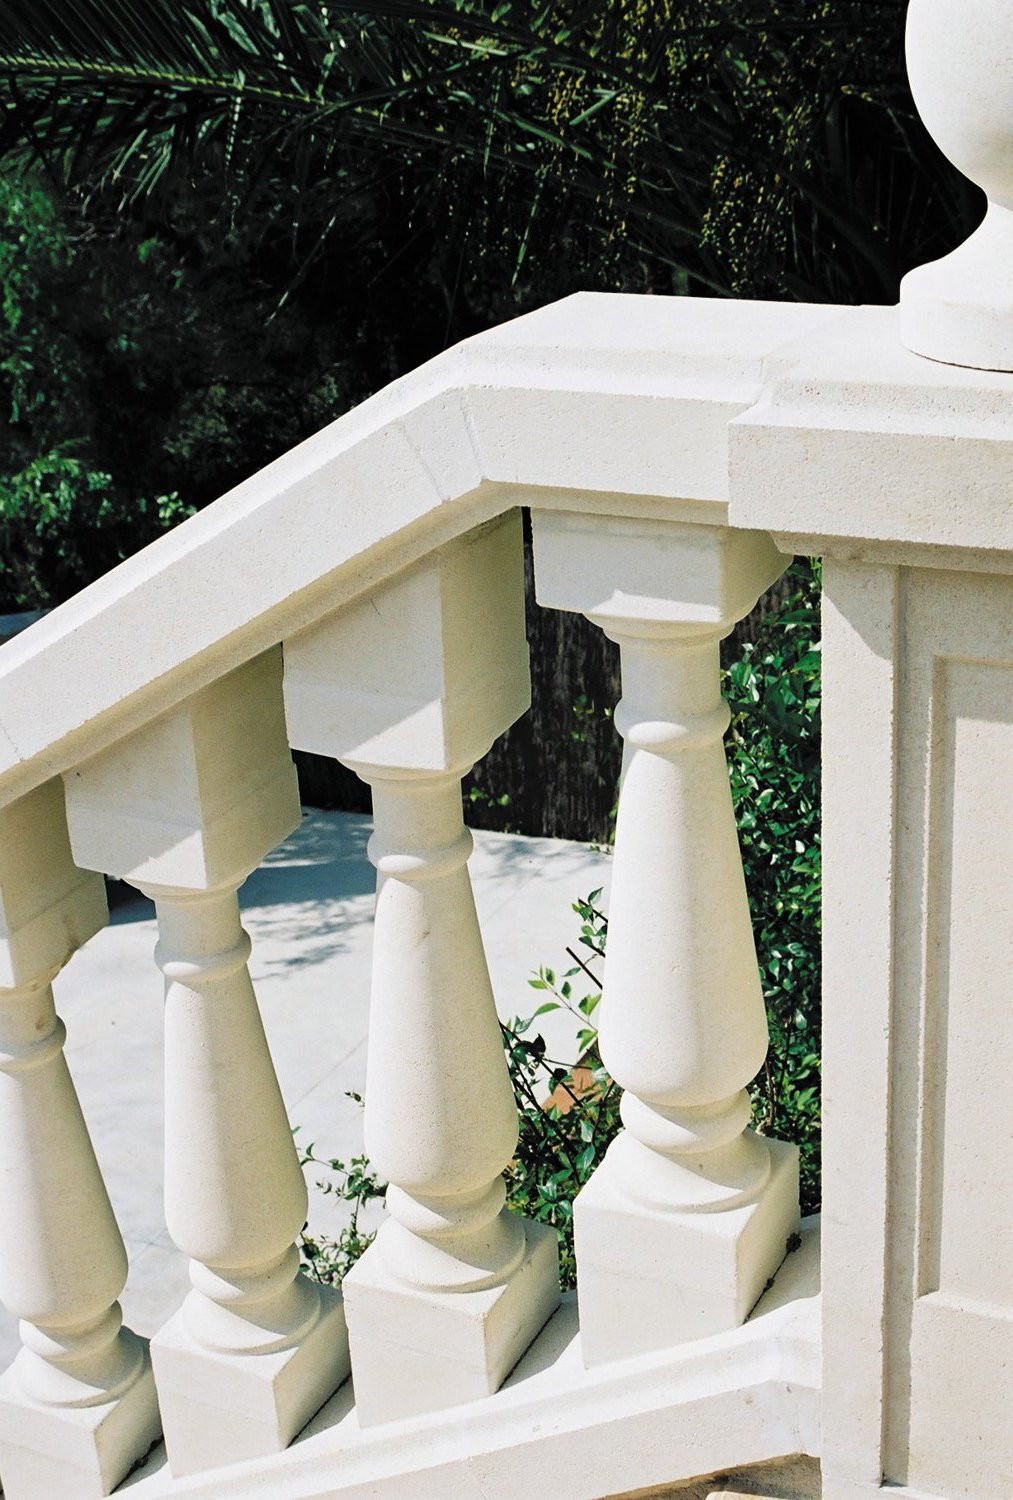 Wedges block for Balusters